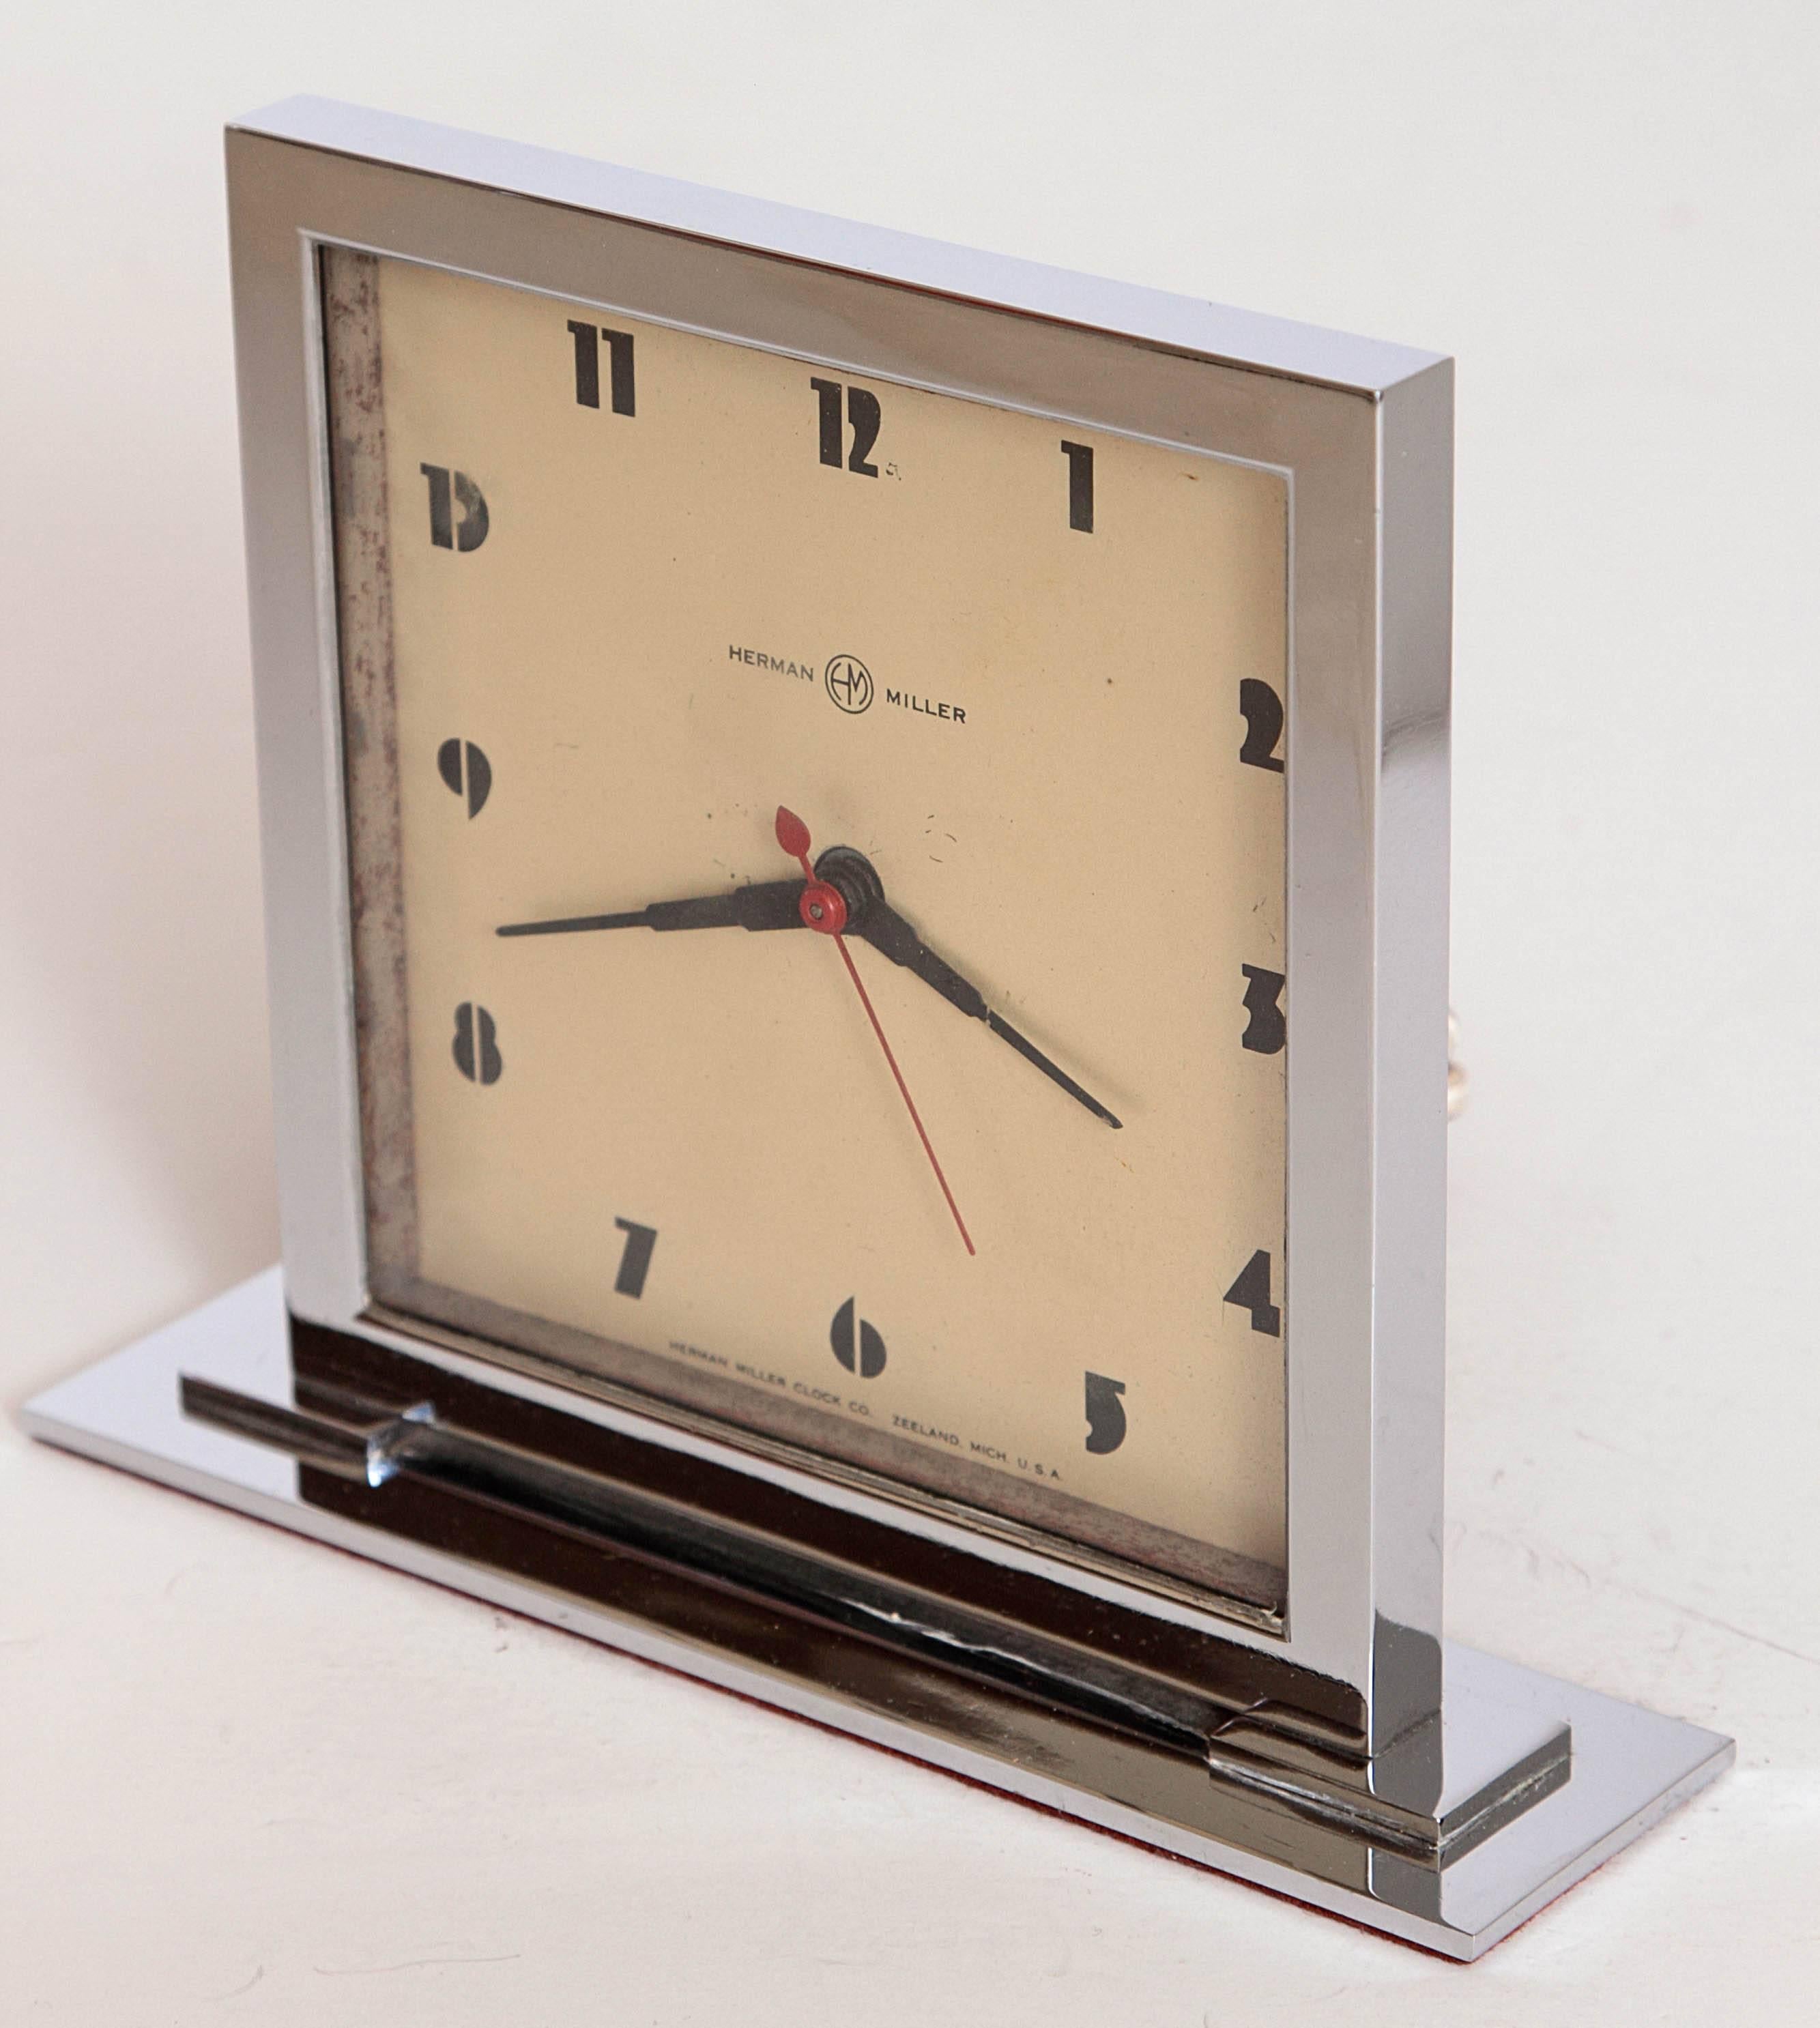 Original model, with the signed H-M face and stylized Rohde numerals, not later unsigned version with 